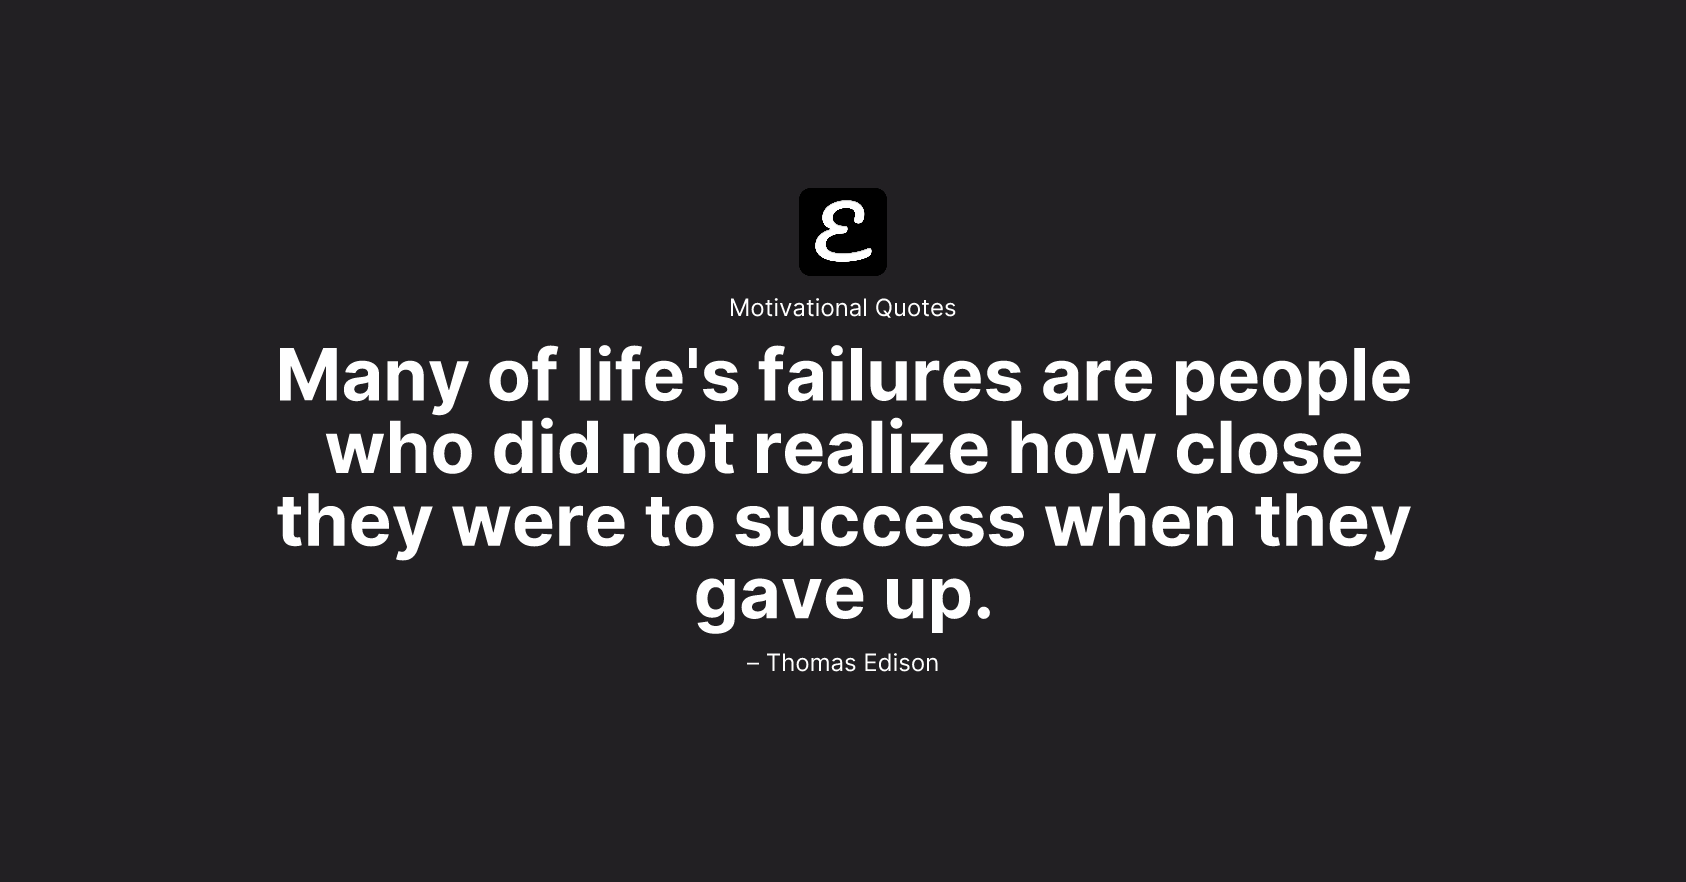 Thomas Edison - Many of life's failures are people who did not realize how close they were to success when they gave up.